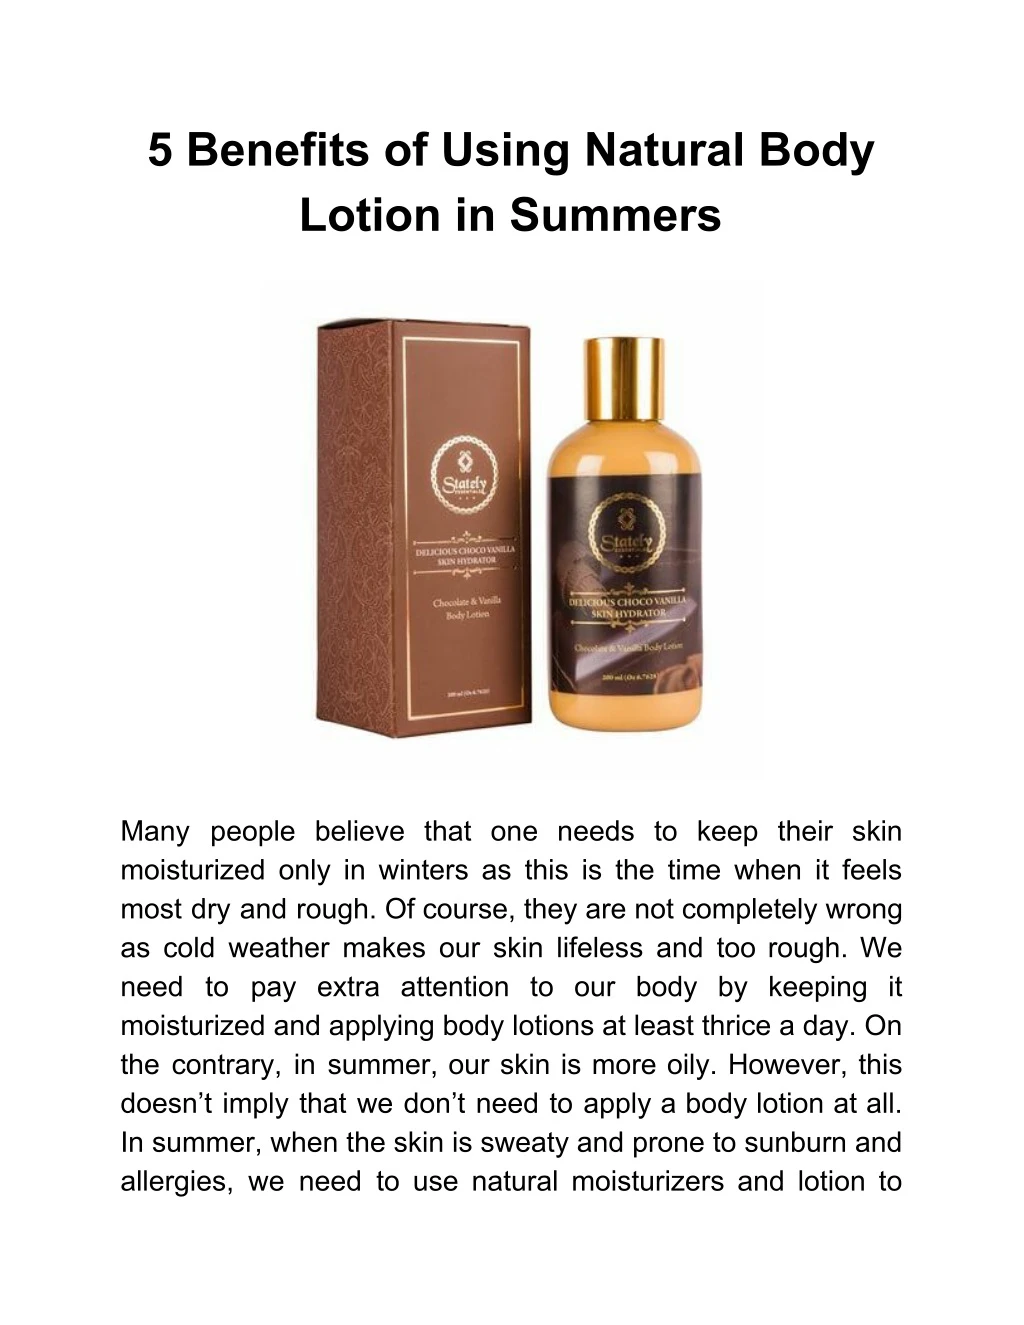 5 benefits of using natural body lotion in summers